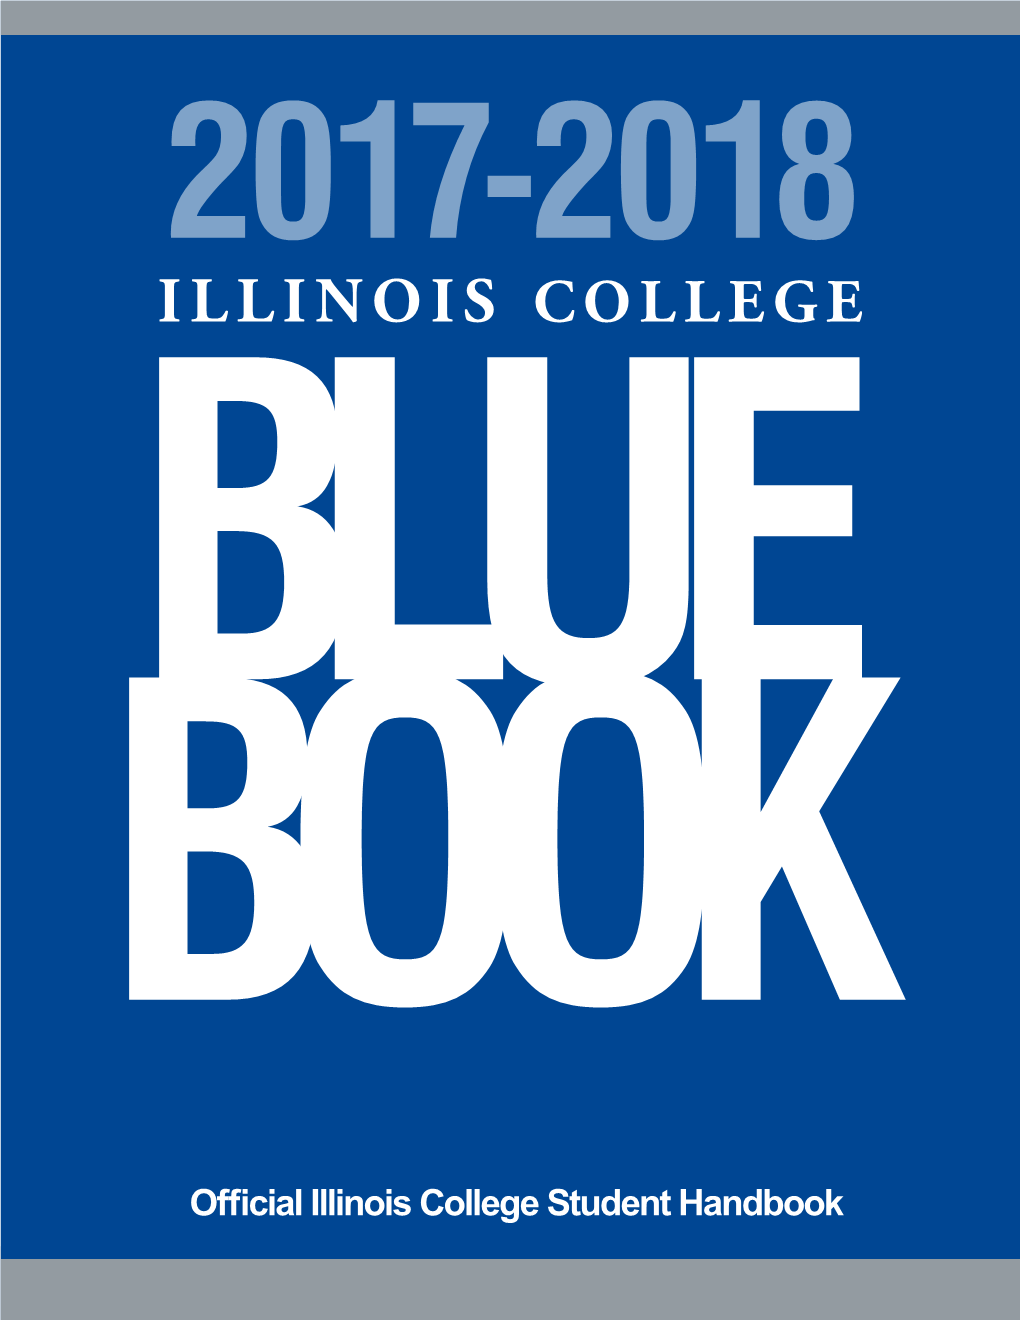 Official Illinois College Student Handbook INTRODUCTION 2017-2018 1A Table of Contents SECTION a - INTRODUCTION Dining Services